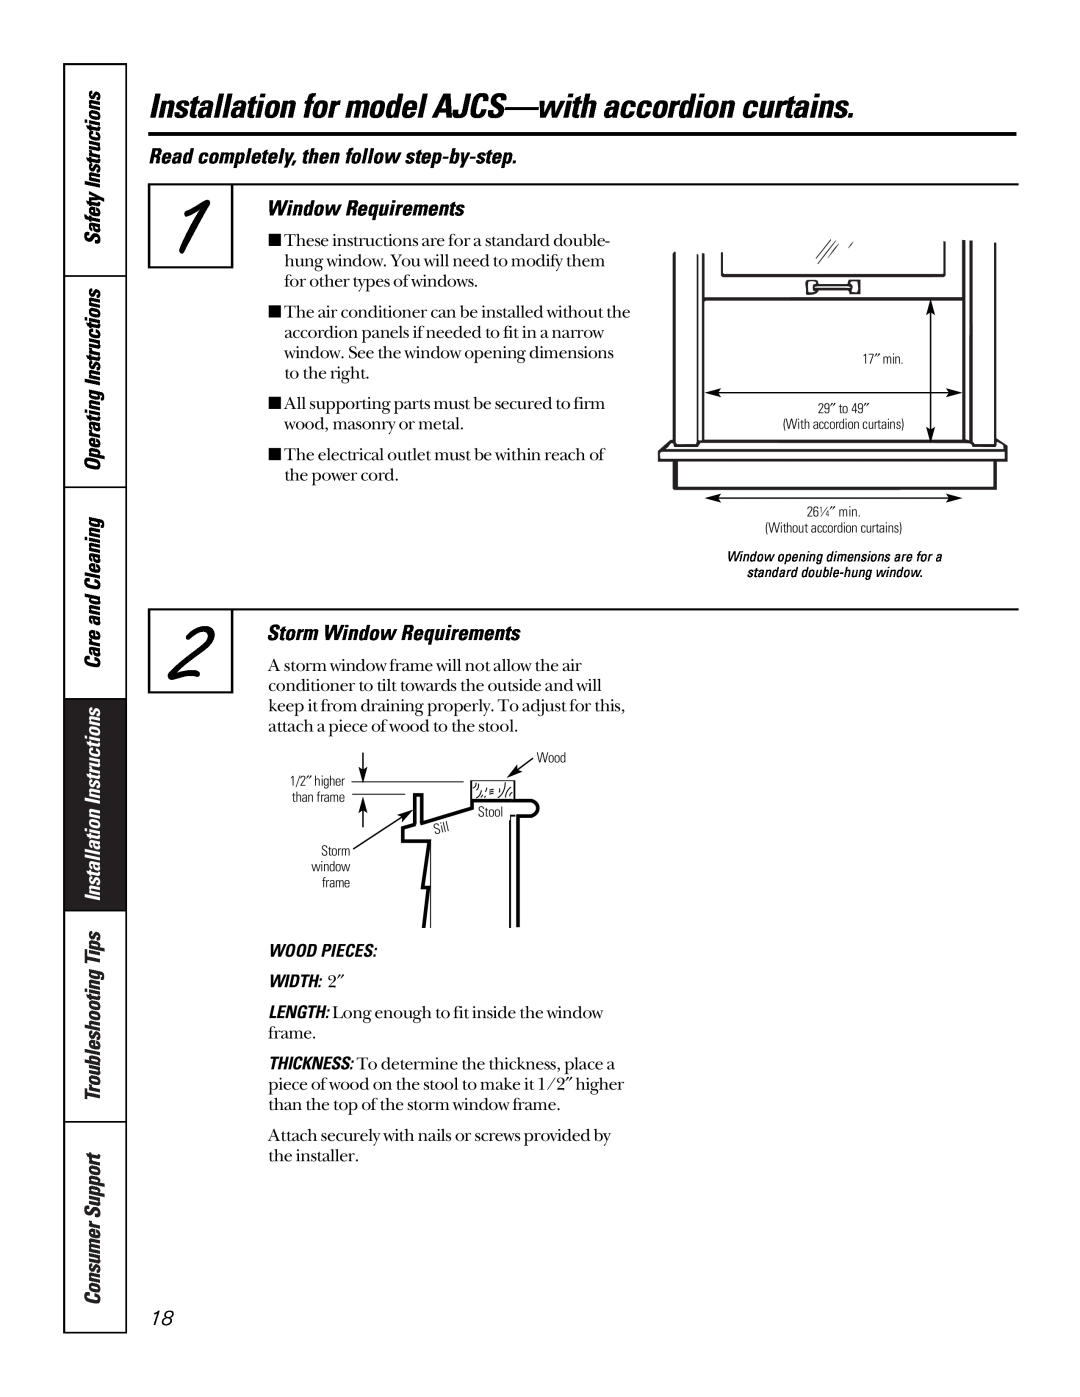 GE 10 AZA Cleaning Operating Instructions Safety, Read completely, then follow step-by-step, Window Requirements 